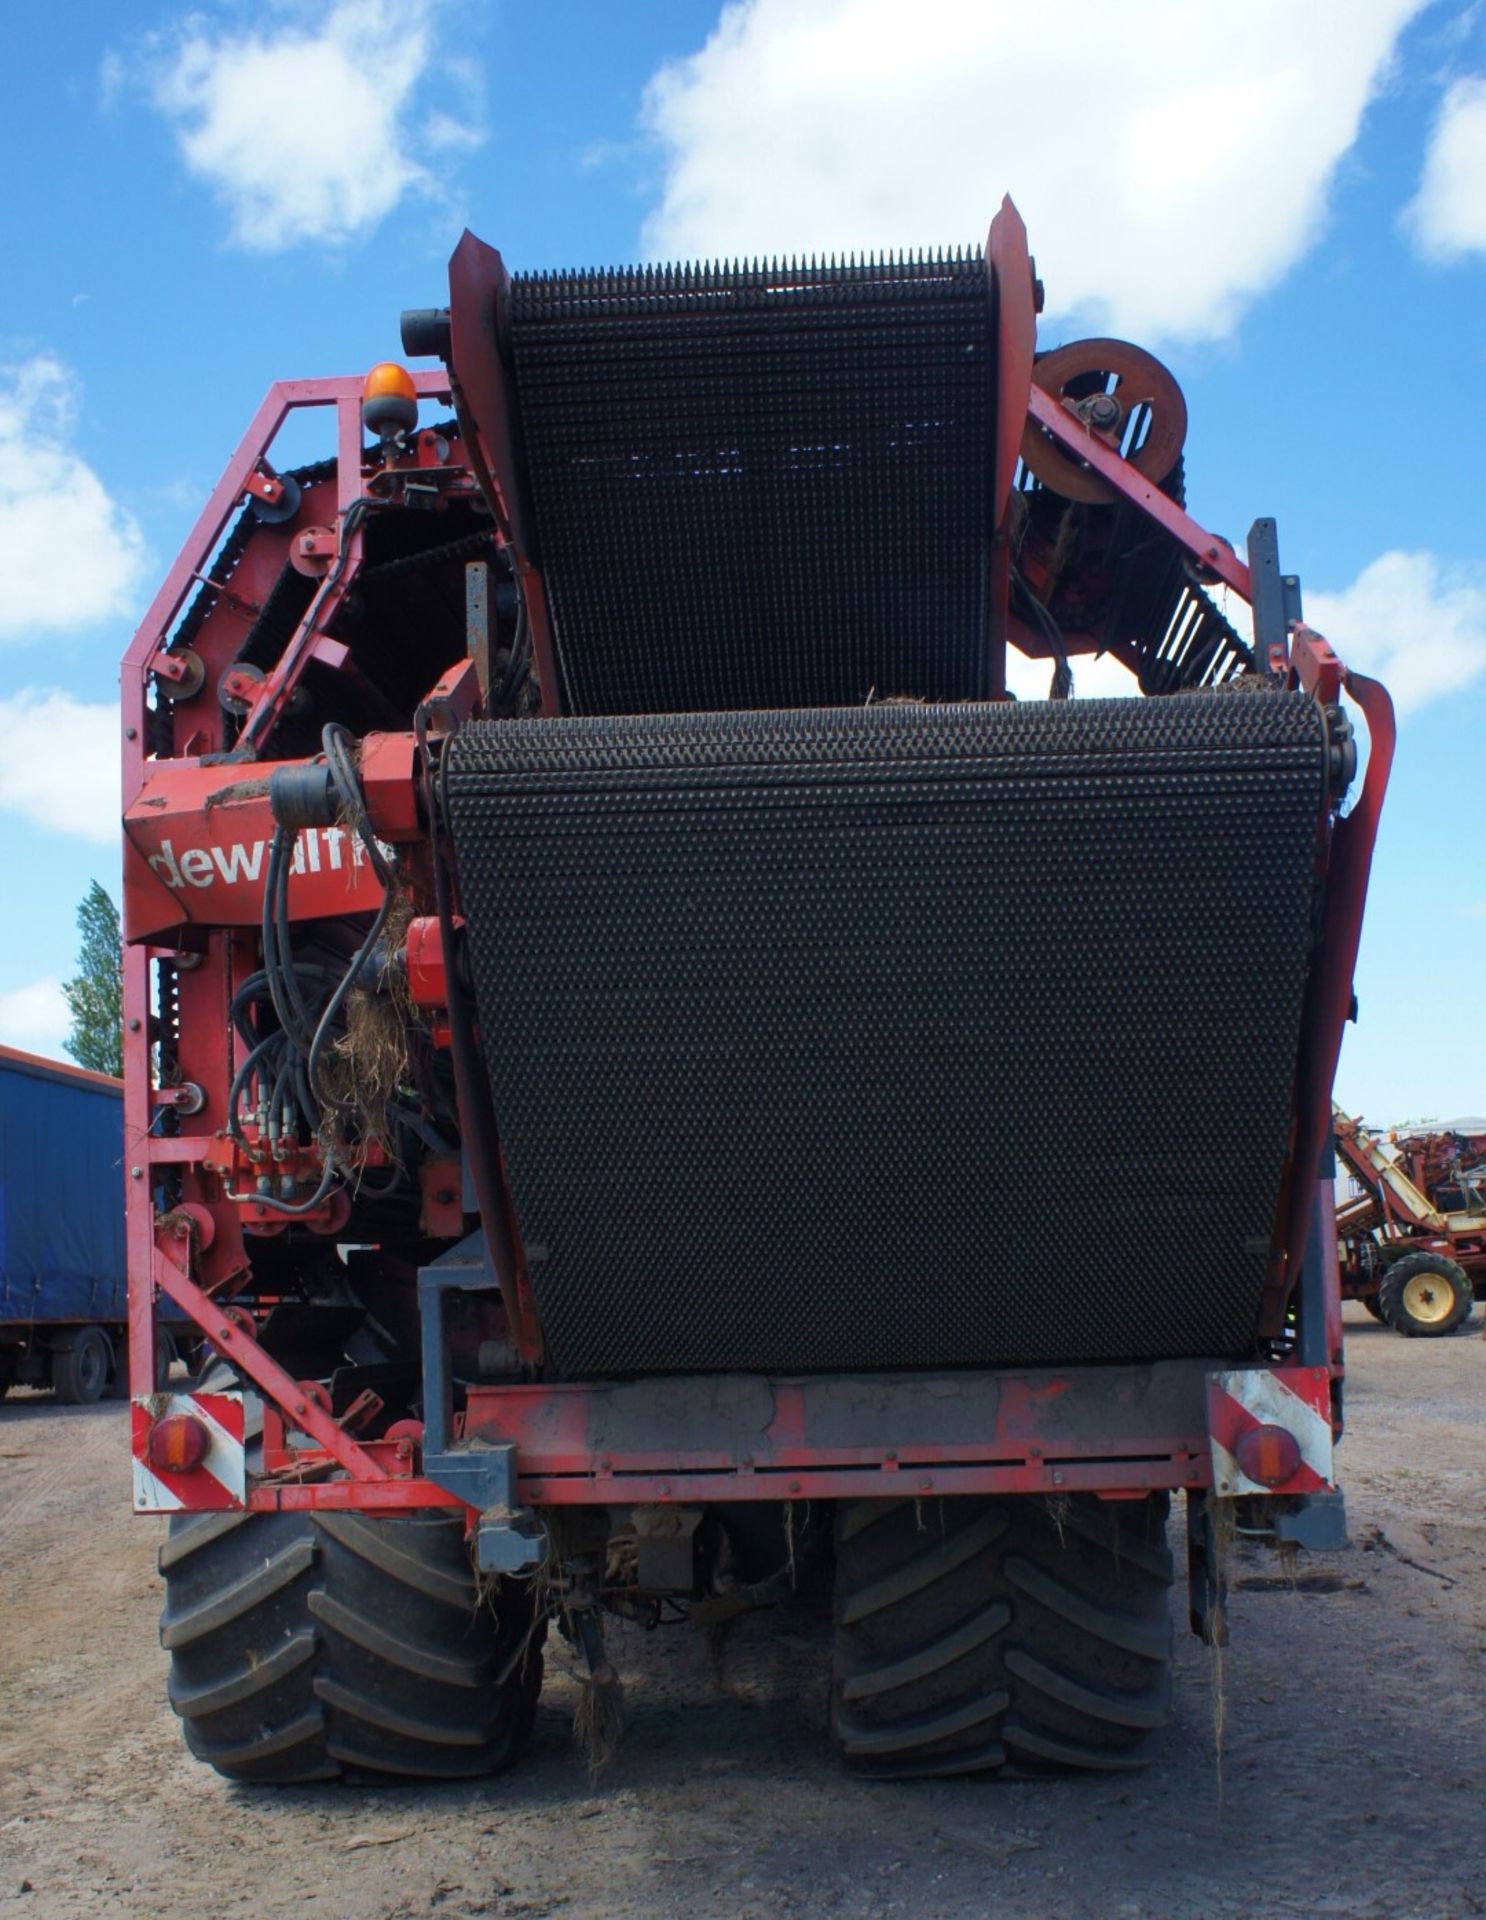 Dewulf RS2060 Trailed 2-Row Sieving Harvester, Serial Number 5811679, Year 2011 - Image 4 of 10